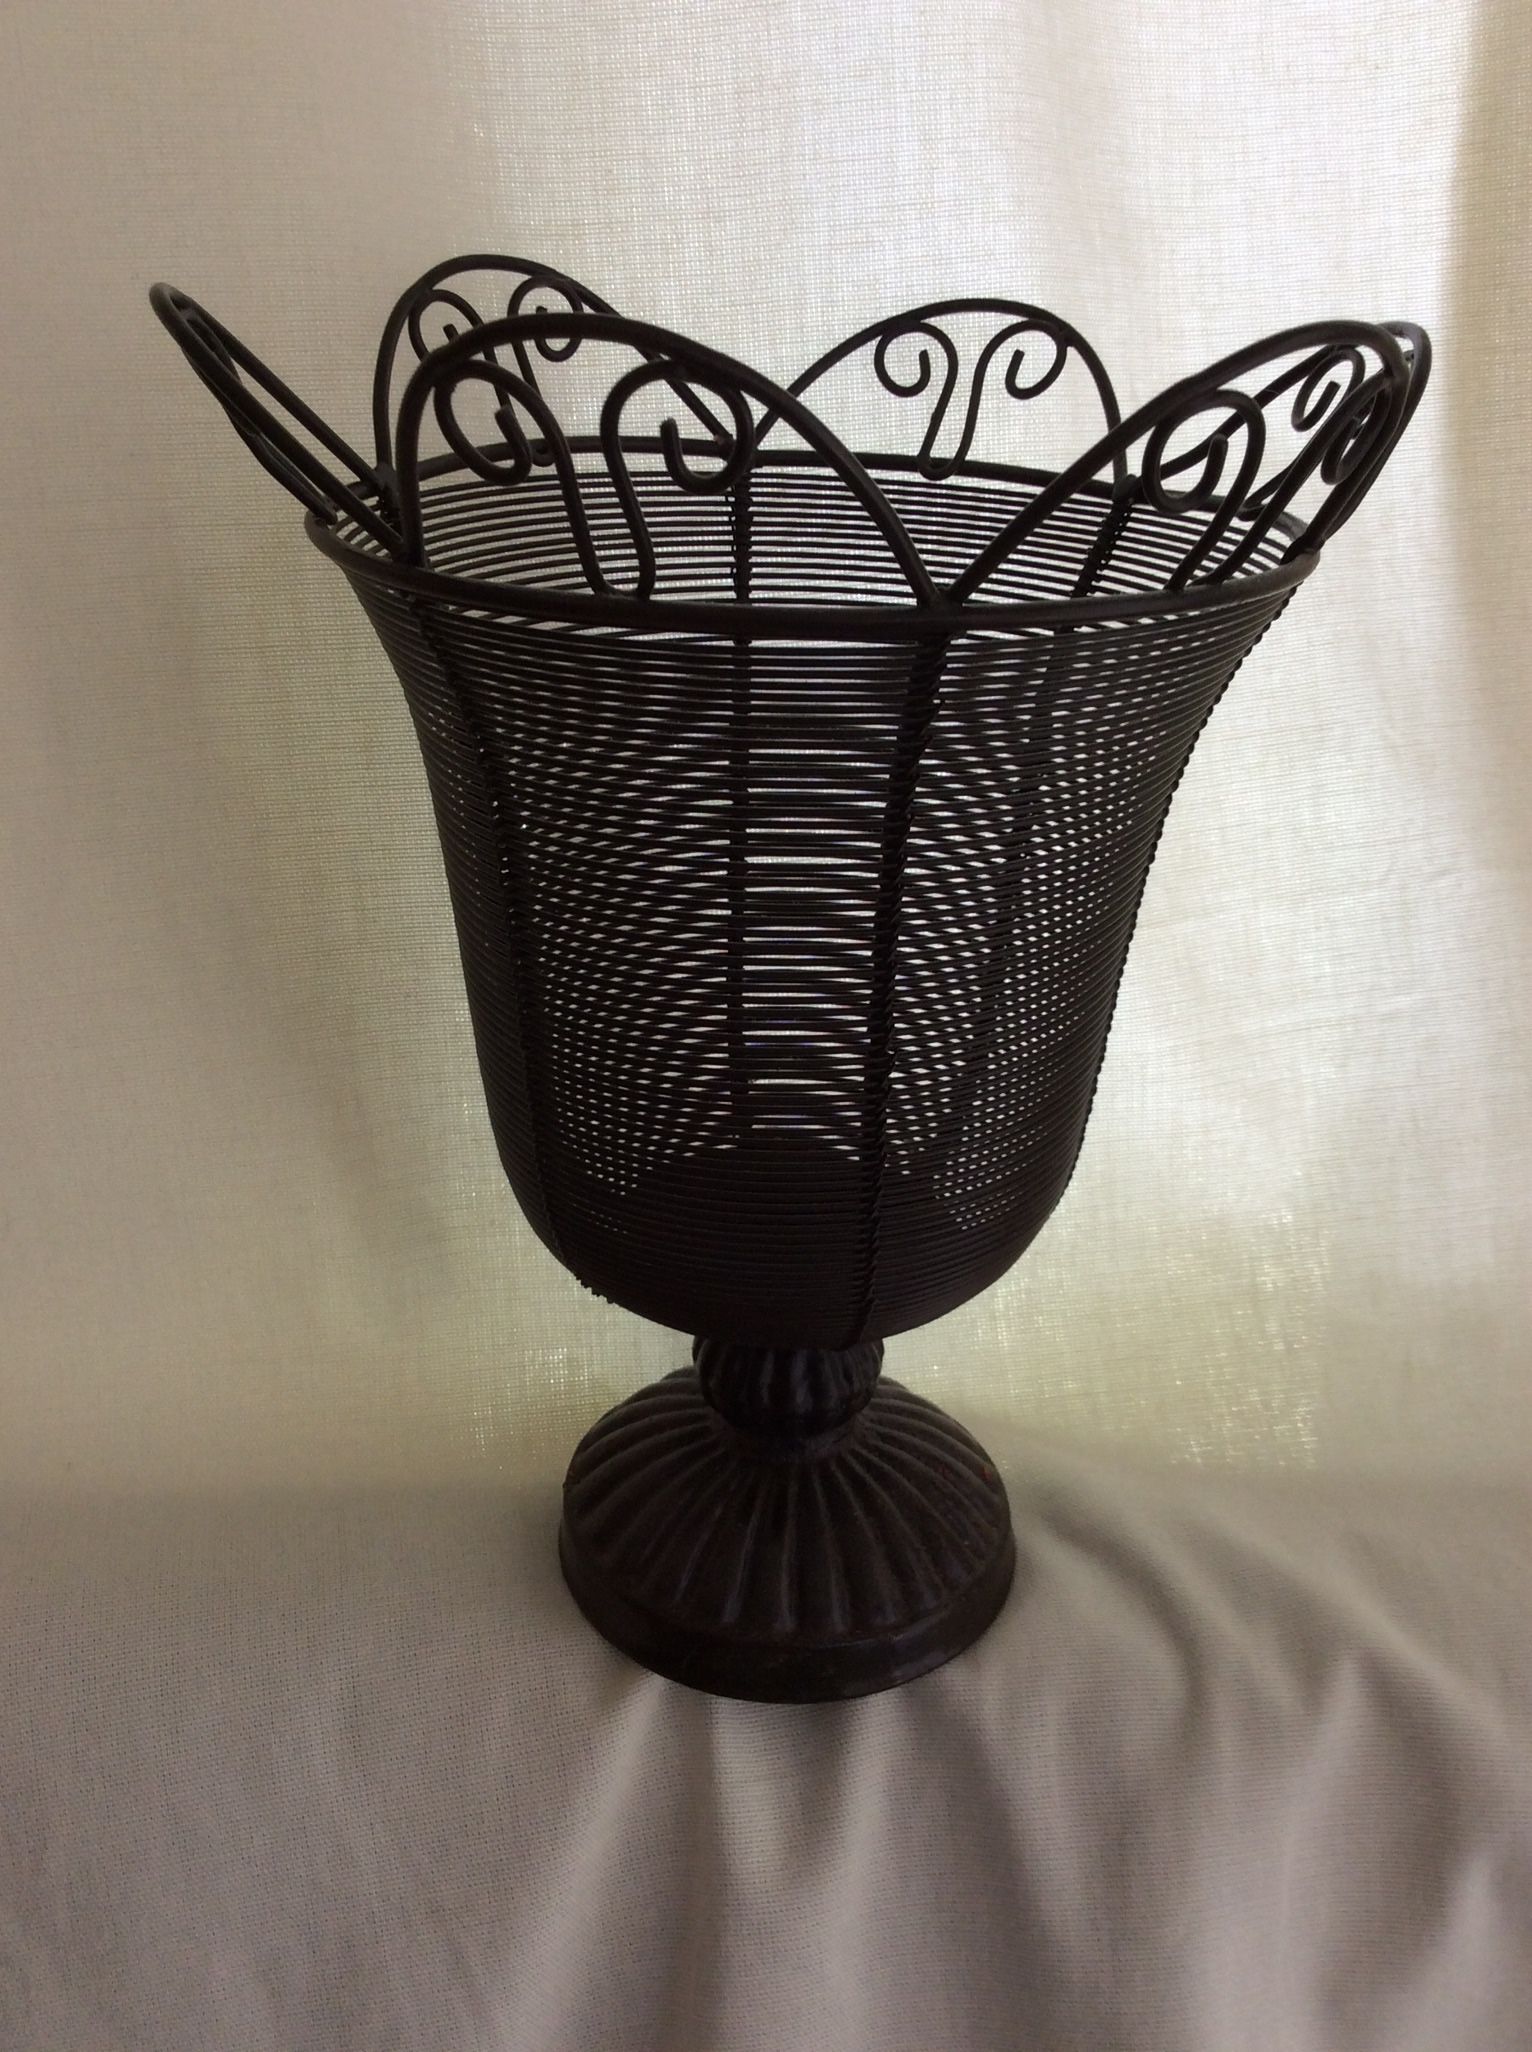 Metal Wire Vase Can Hold Artificial Flowers Or Pillar Candle New